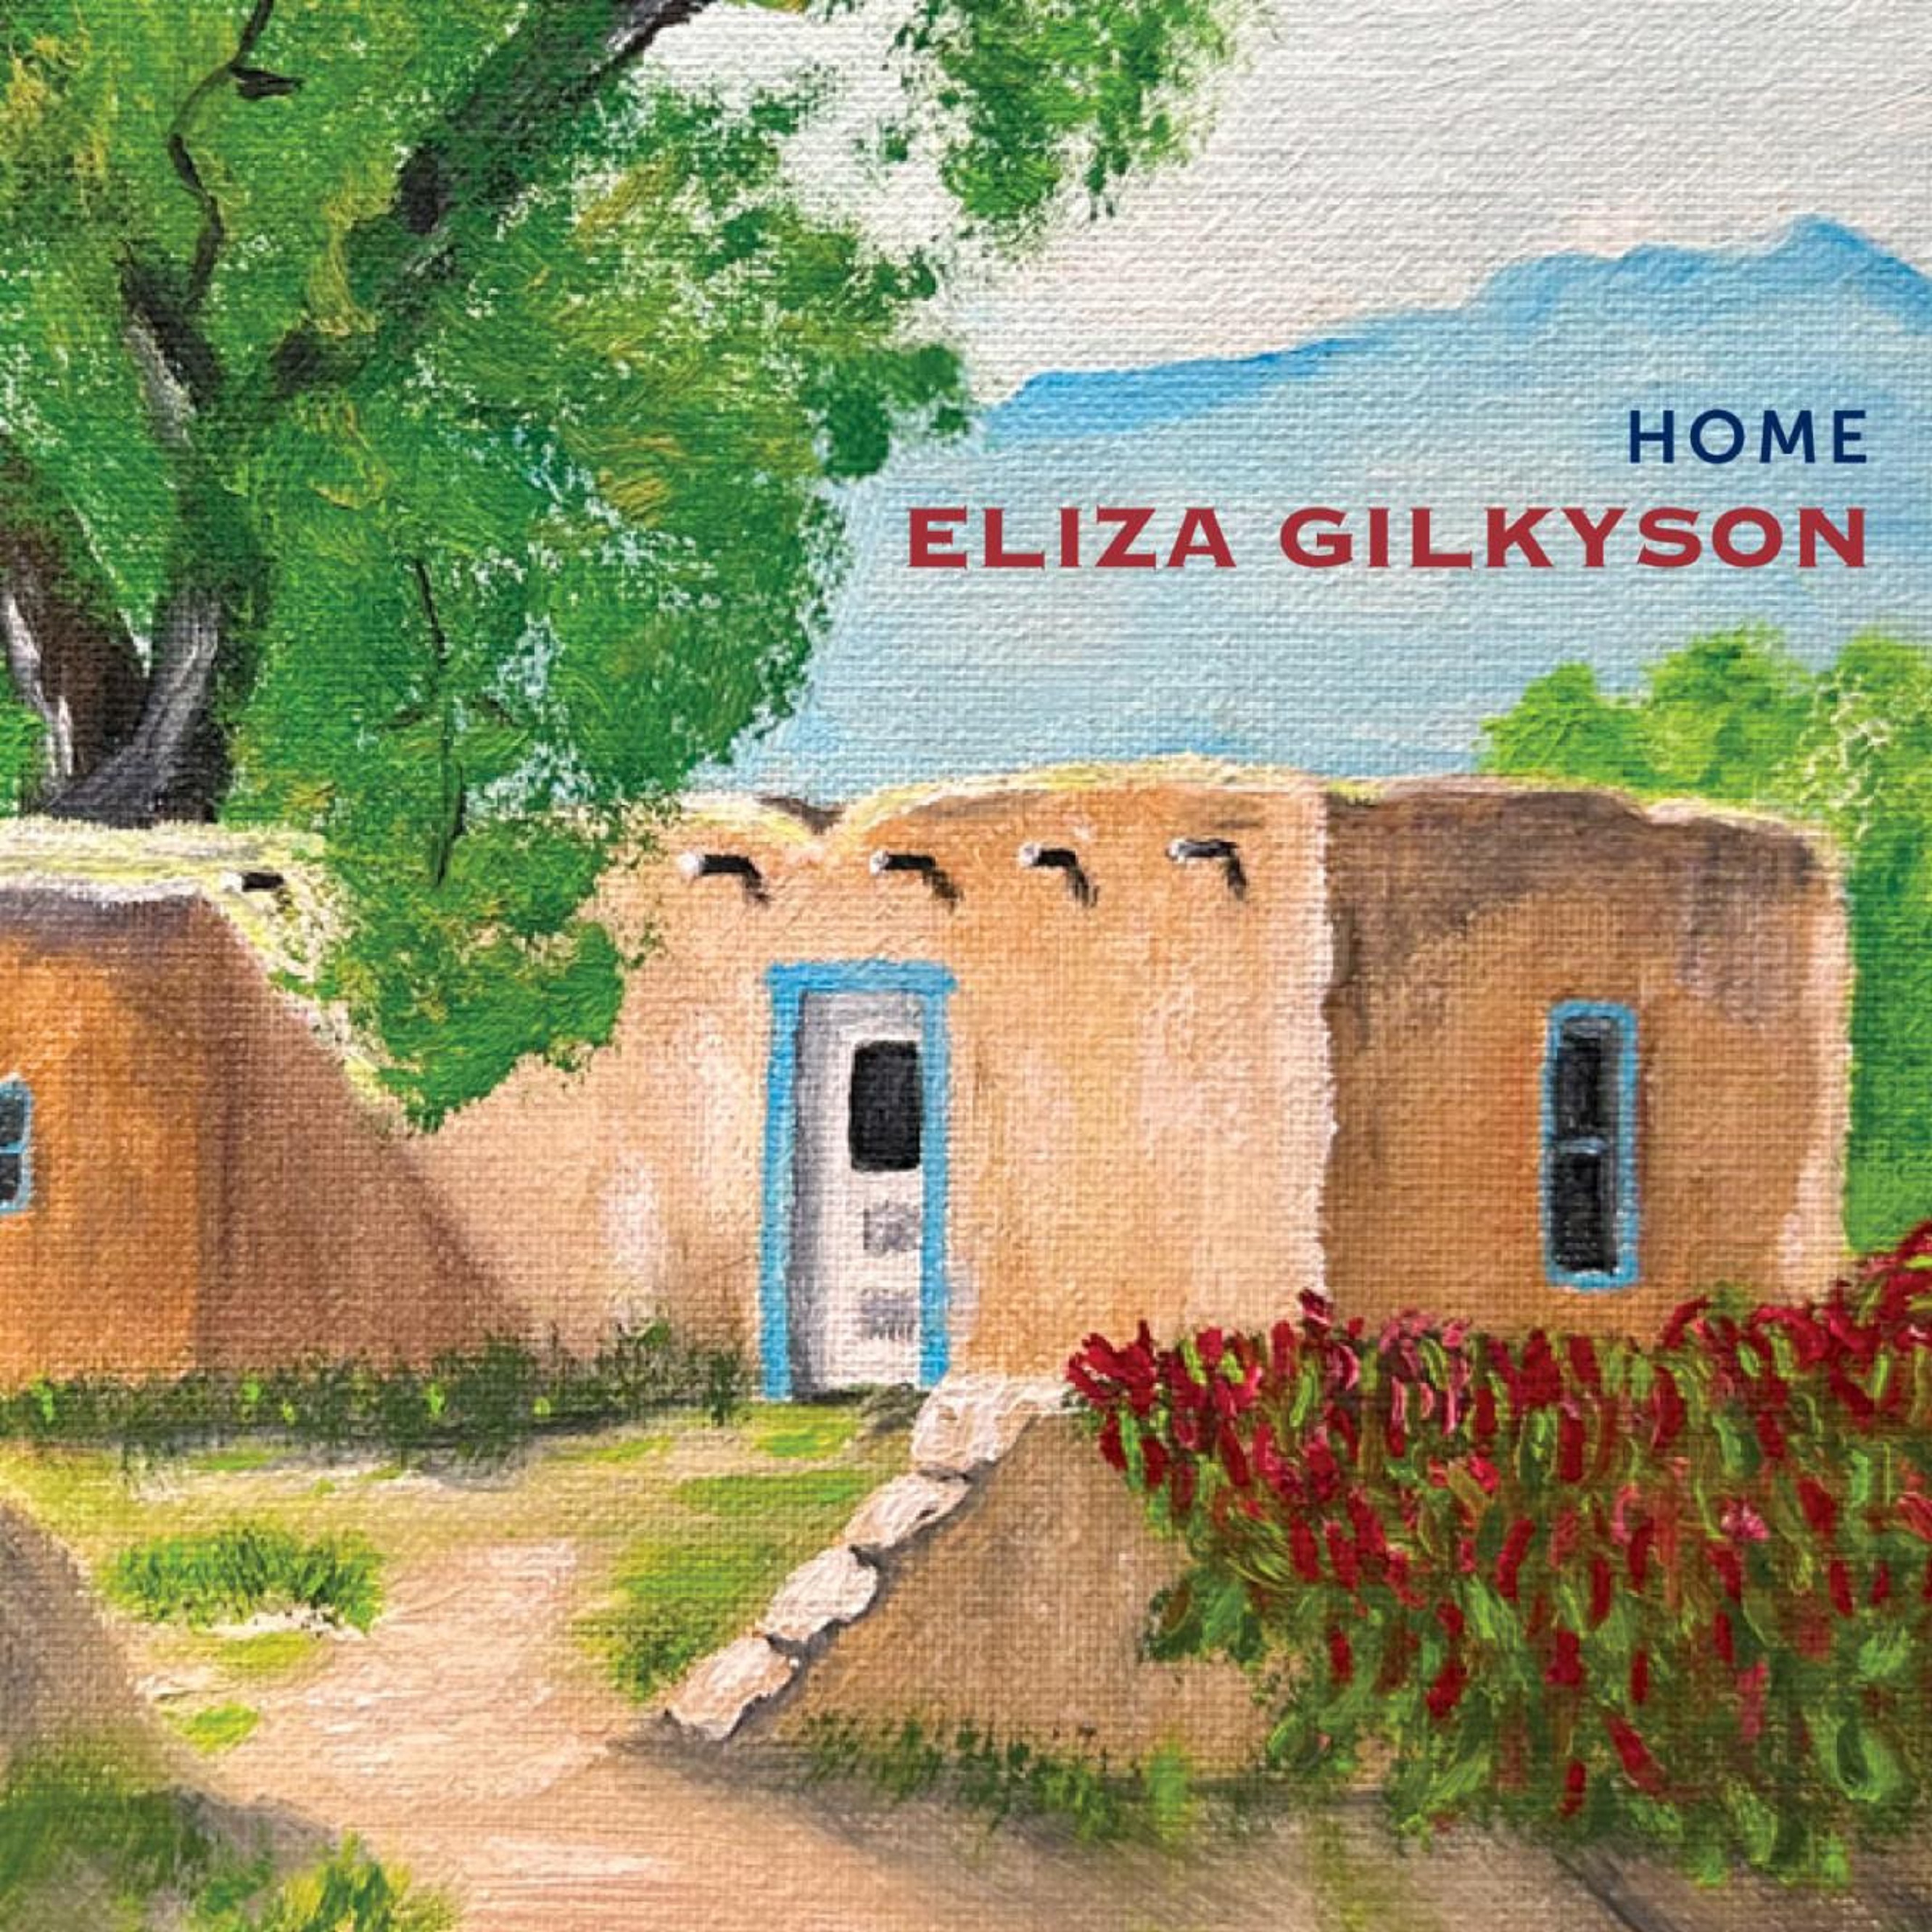 ELIZA GILKYSON shares first single from her new album HOME